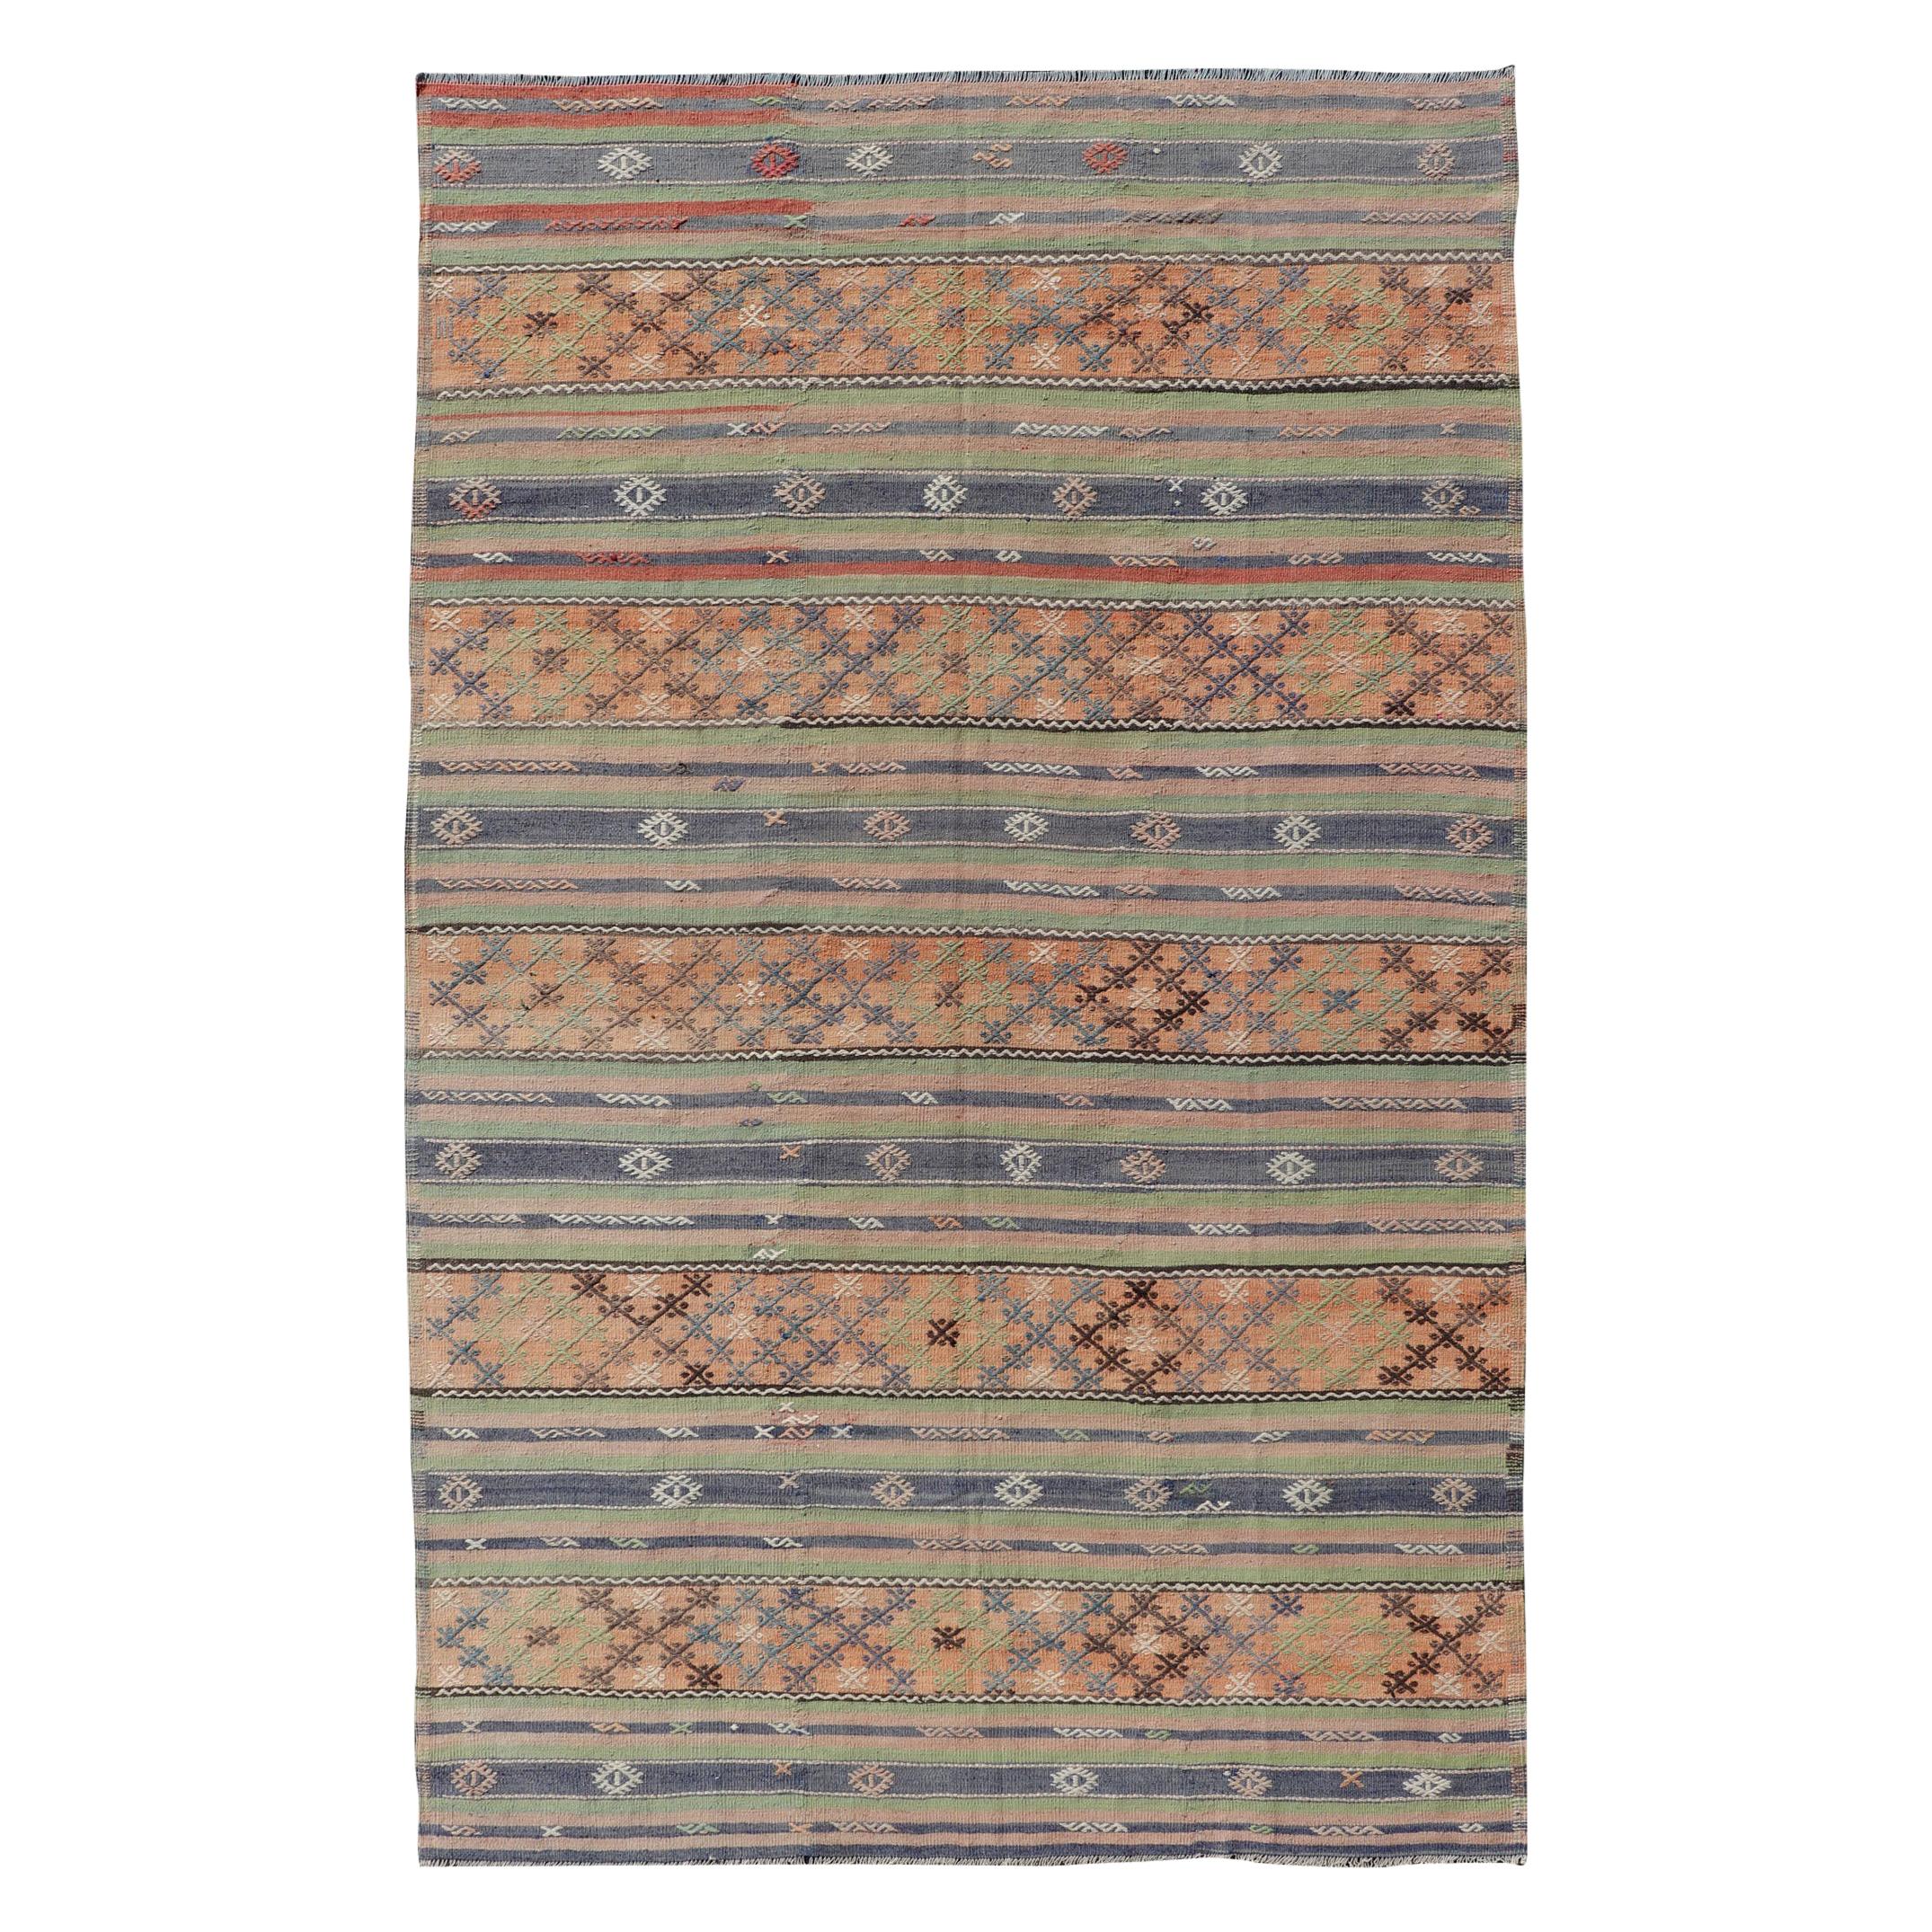 Colorful Turkish Kilim with Stripes and Geometric Elements in Orange and Green